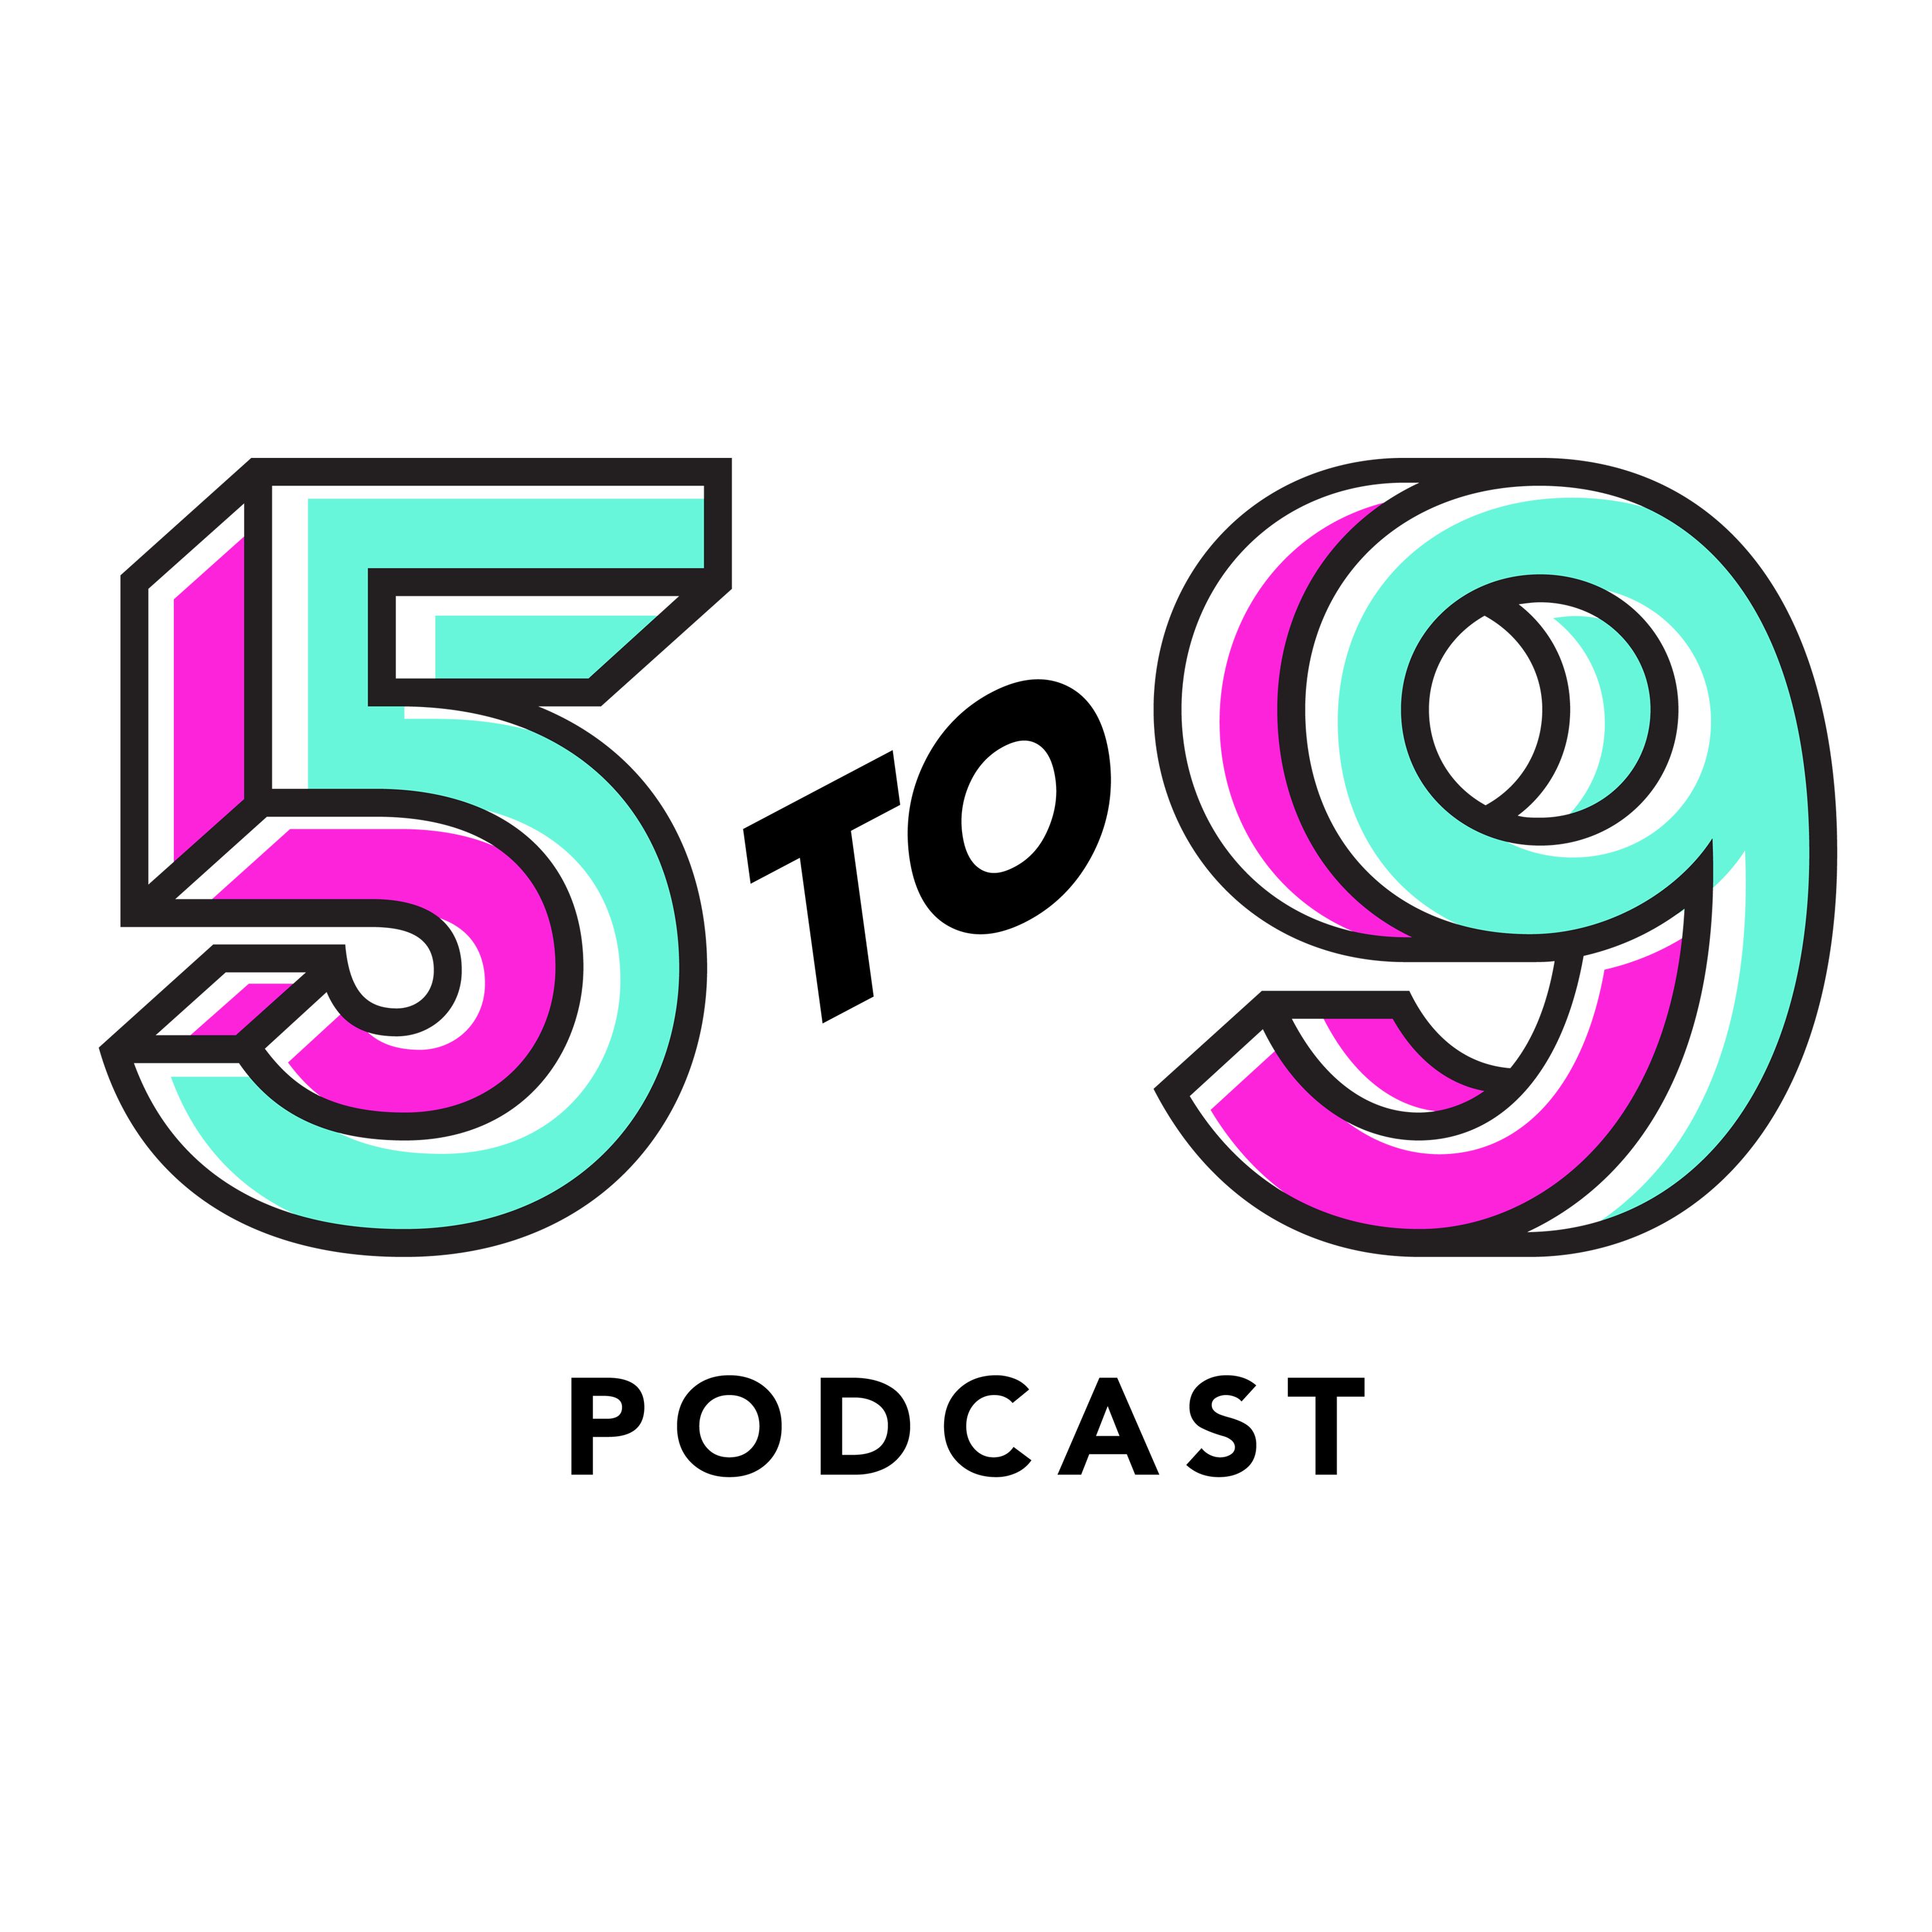 5to9 Podcast